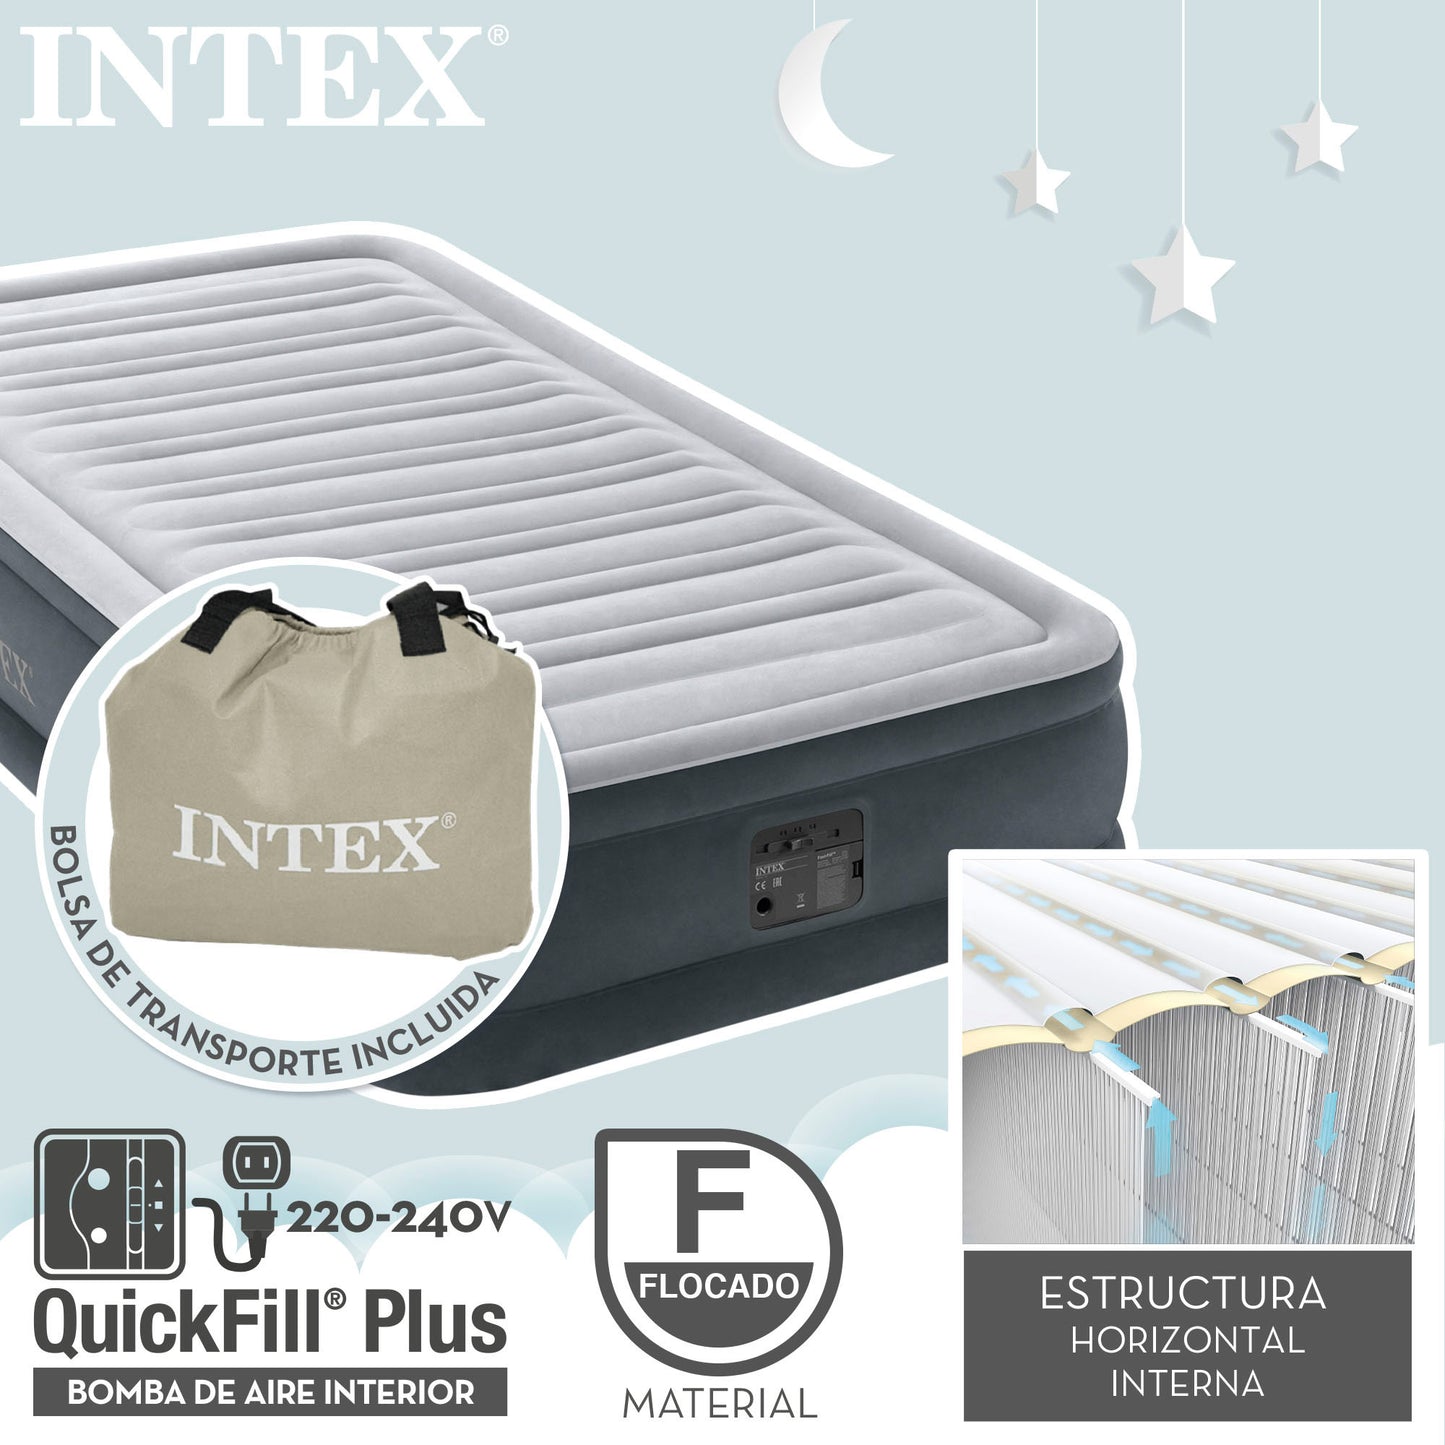 INTEX hard inflatable mattress-Beam Plus Comfort Plush, double inflatable bed, single air bed, inflatable Camping mattress, camping air bed, Intex Inflatable mattresses, inflatable mattress, camping mattress